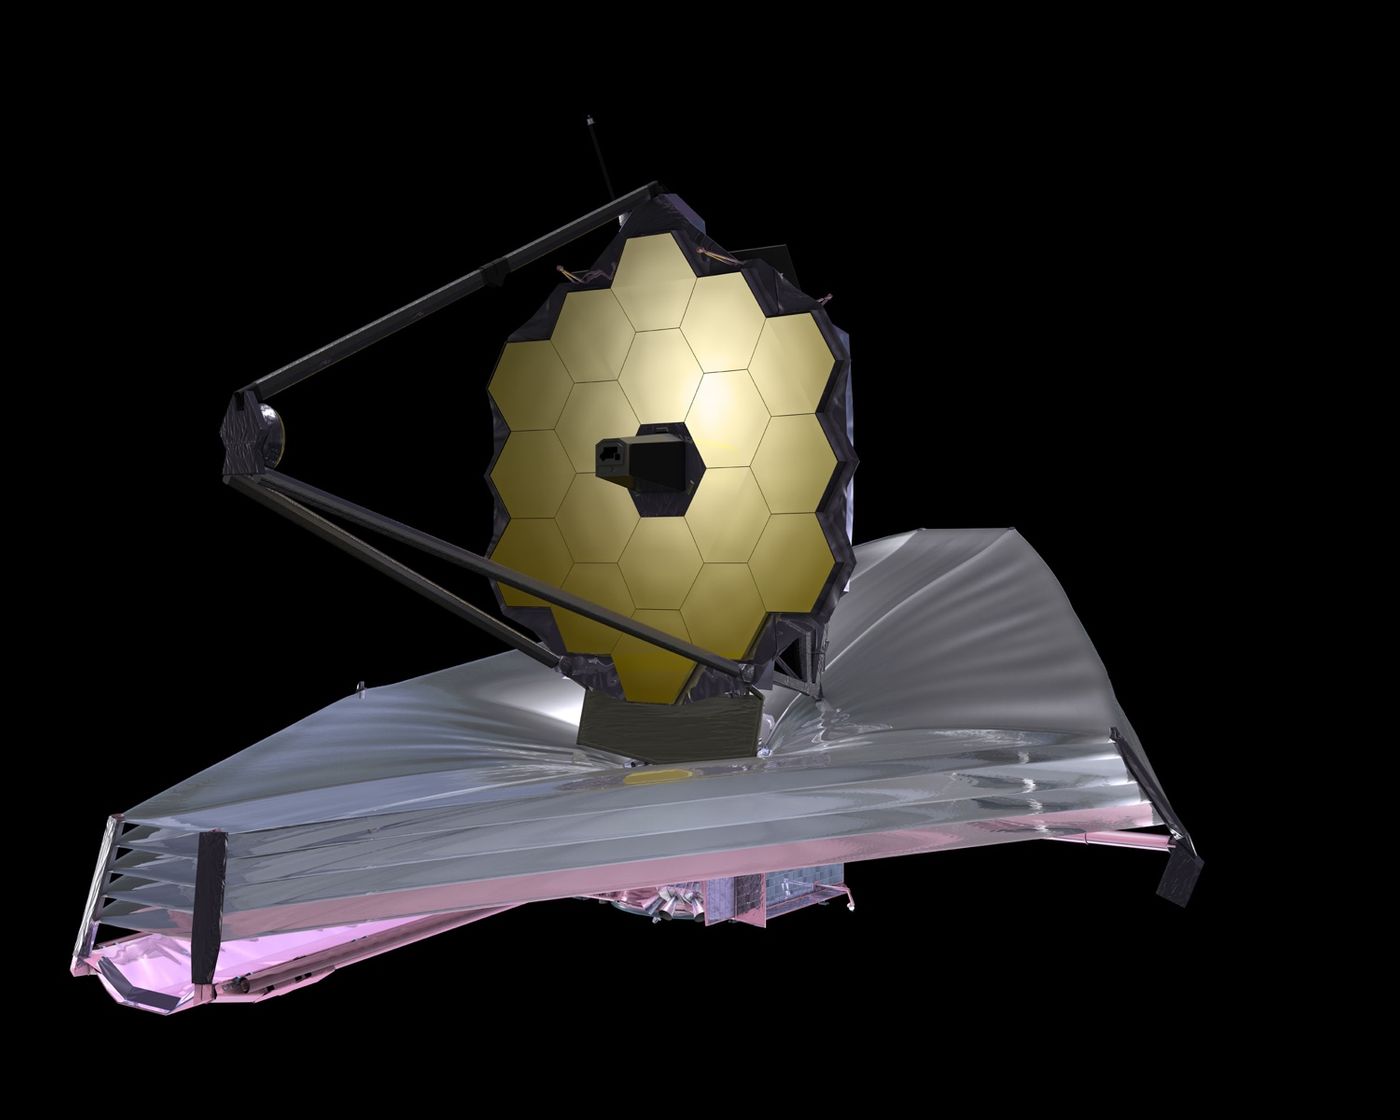 The James Webb Space Telescope will peer at the red planet to learn more about its watery past, among other things.